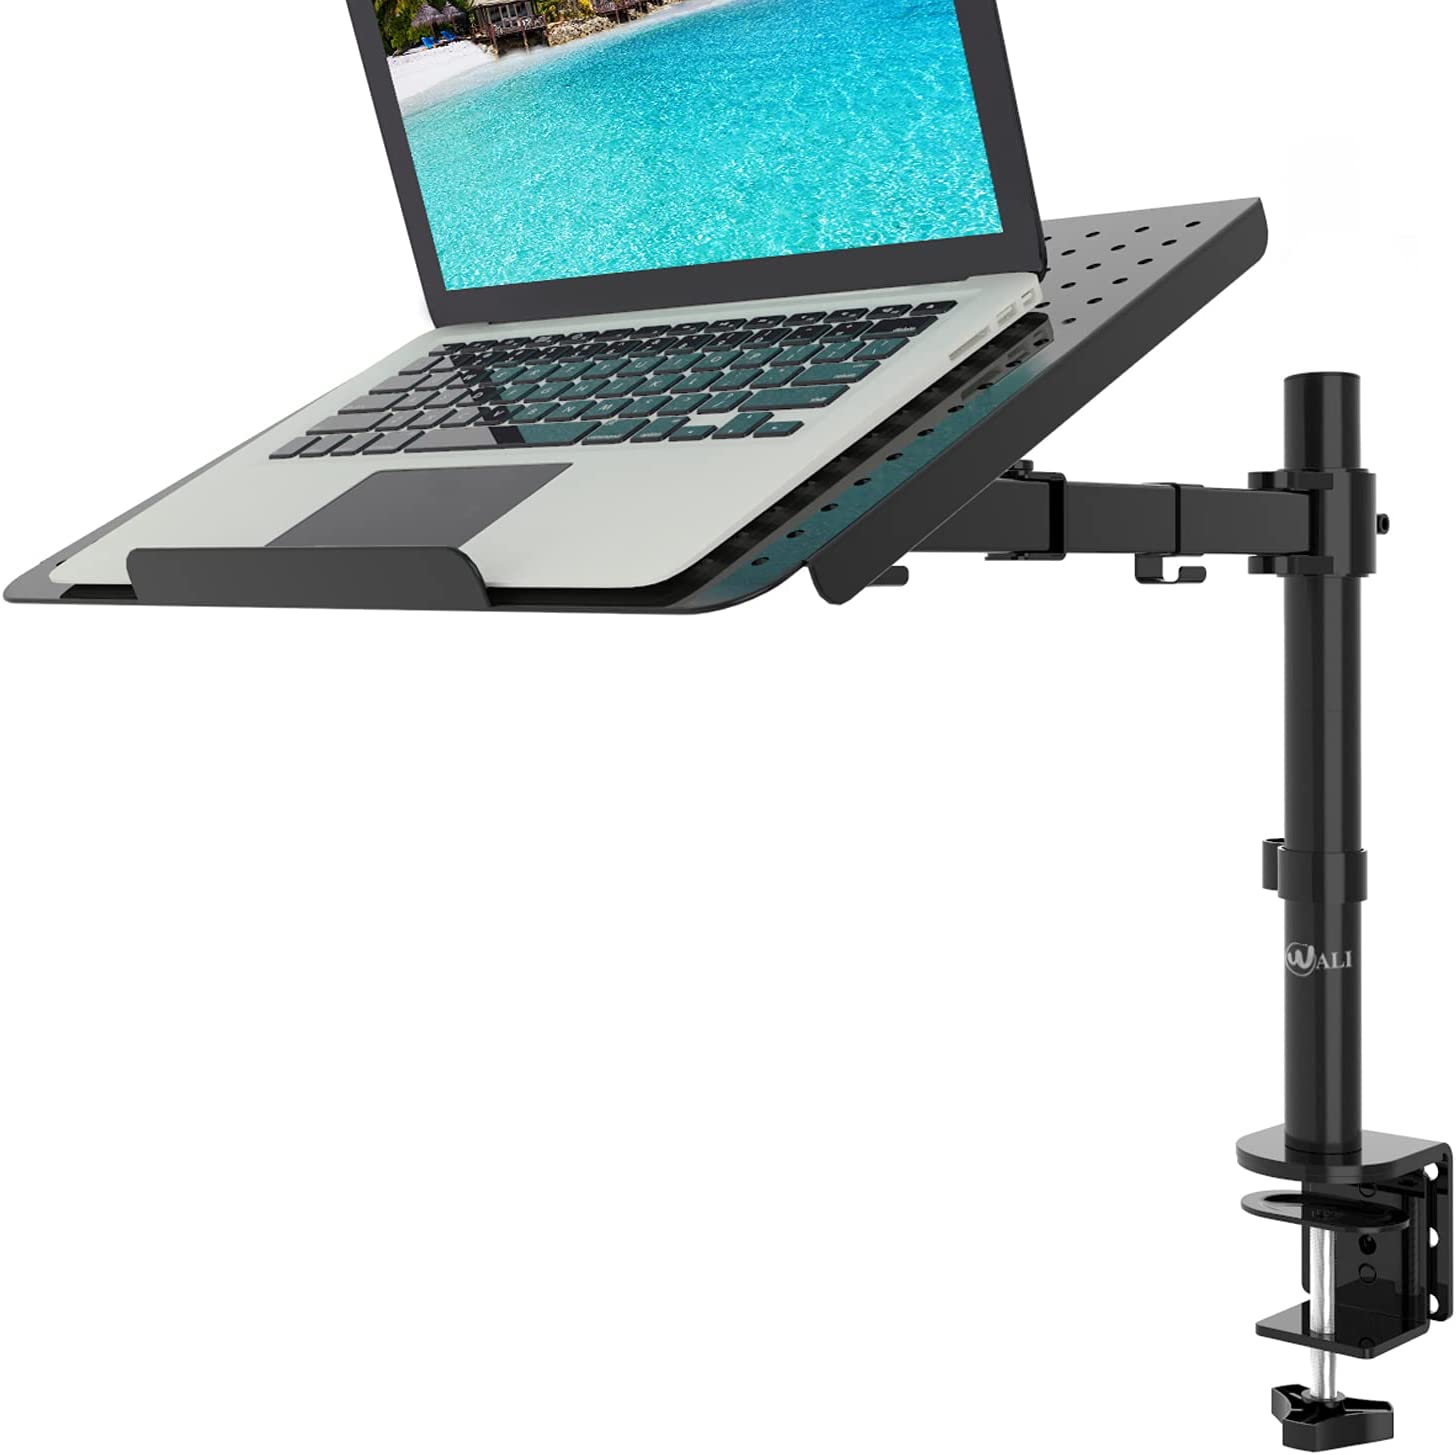 WALI Laptop Tray Desk Mount for 1 Laptop Notebook up [...]